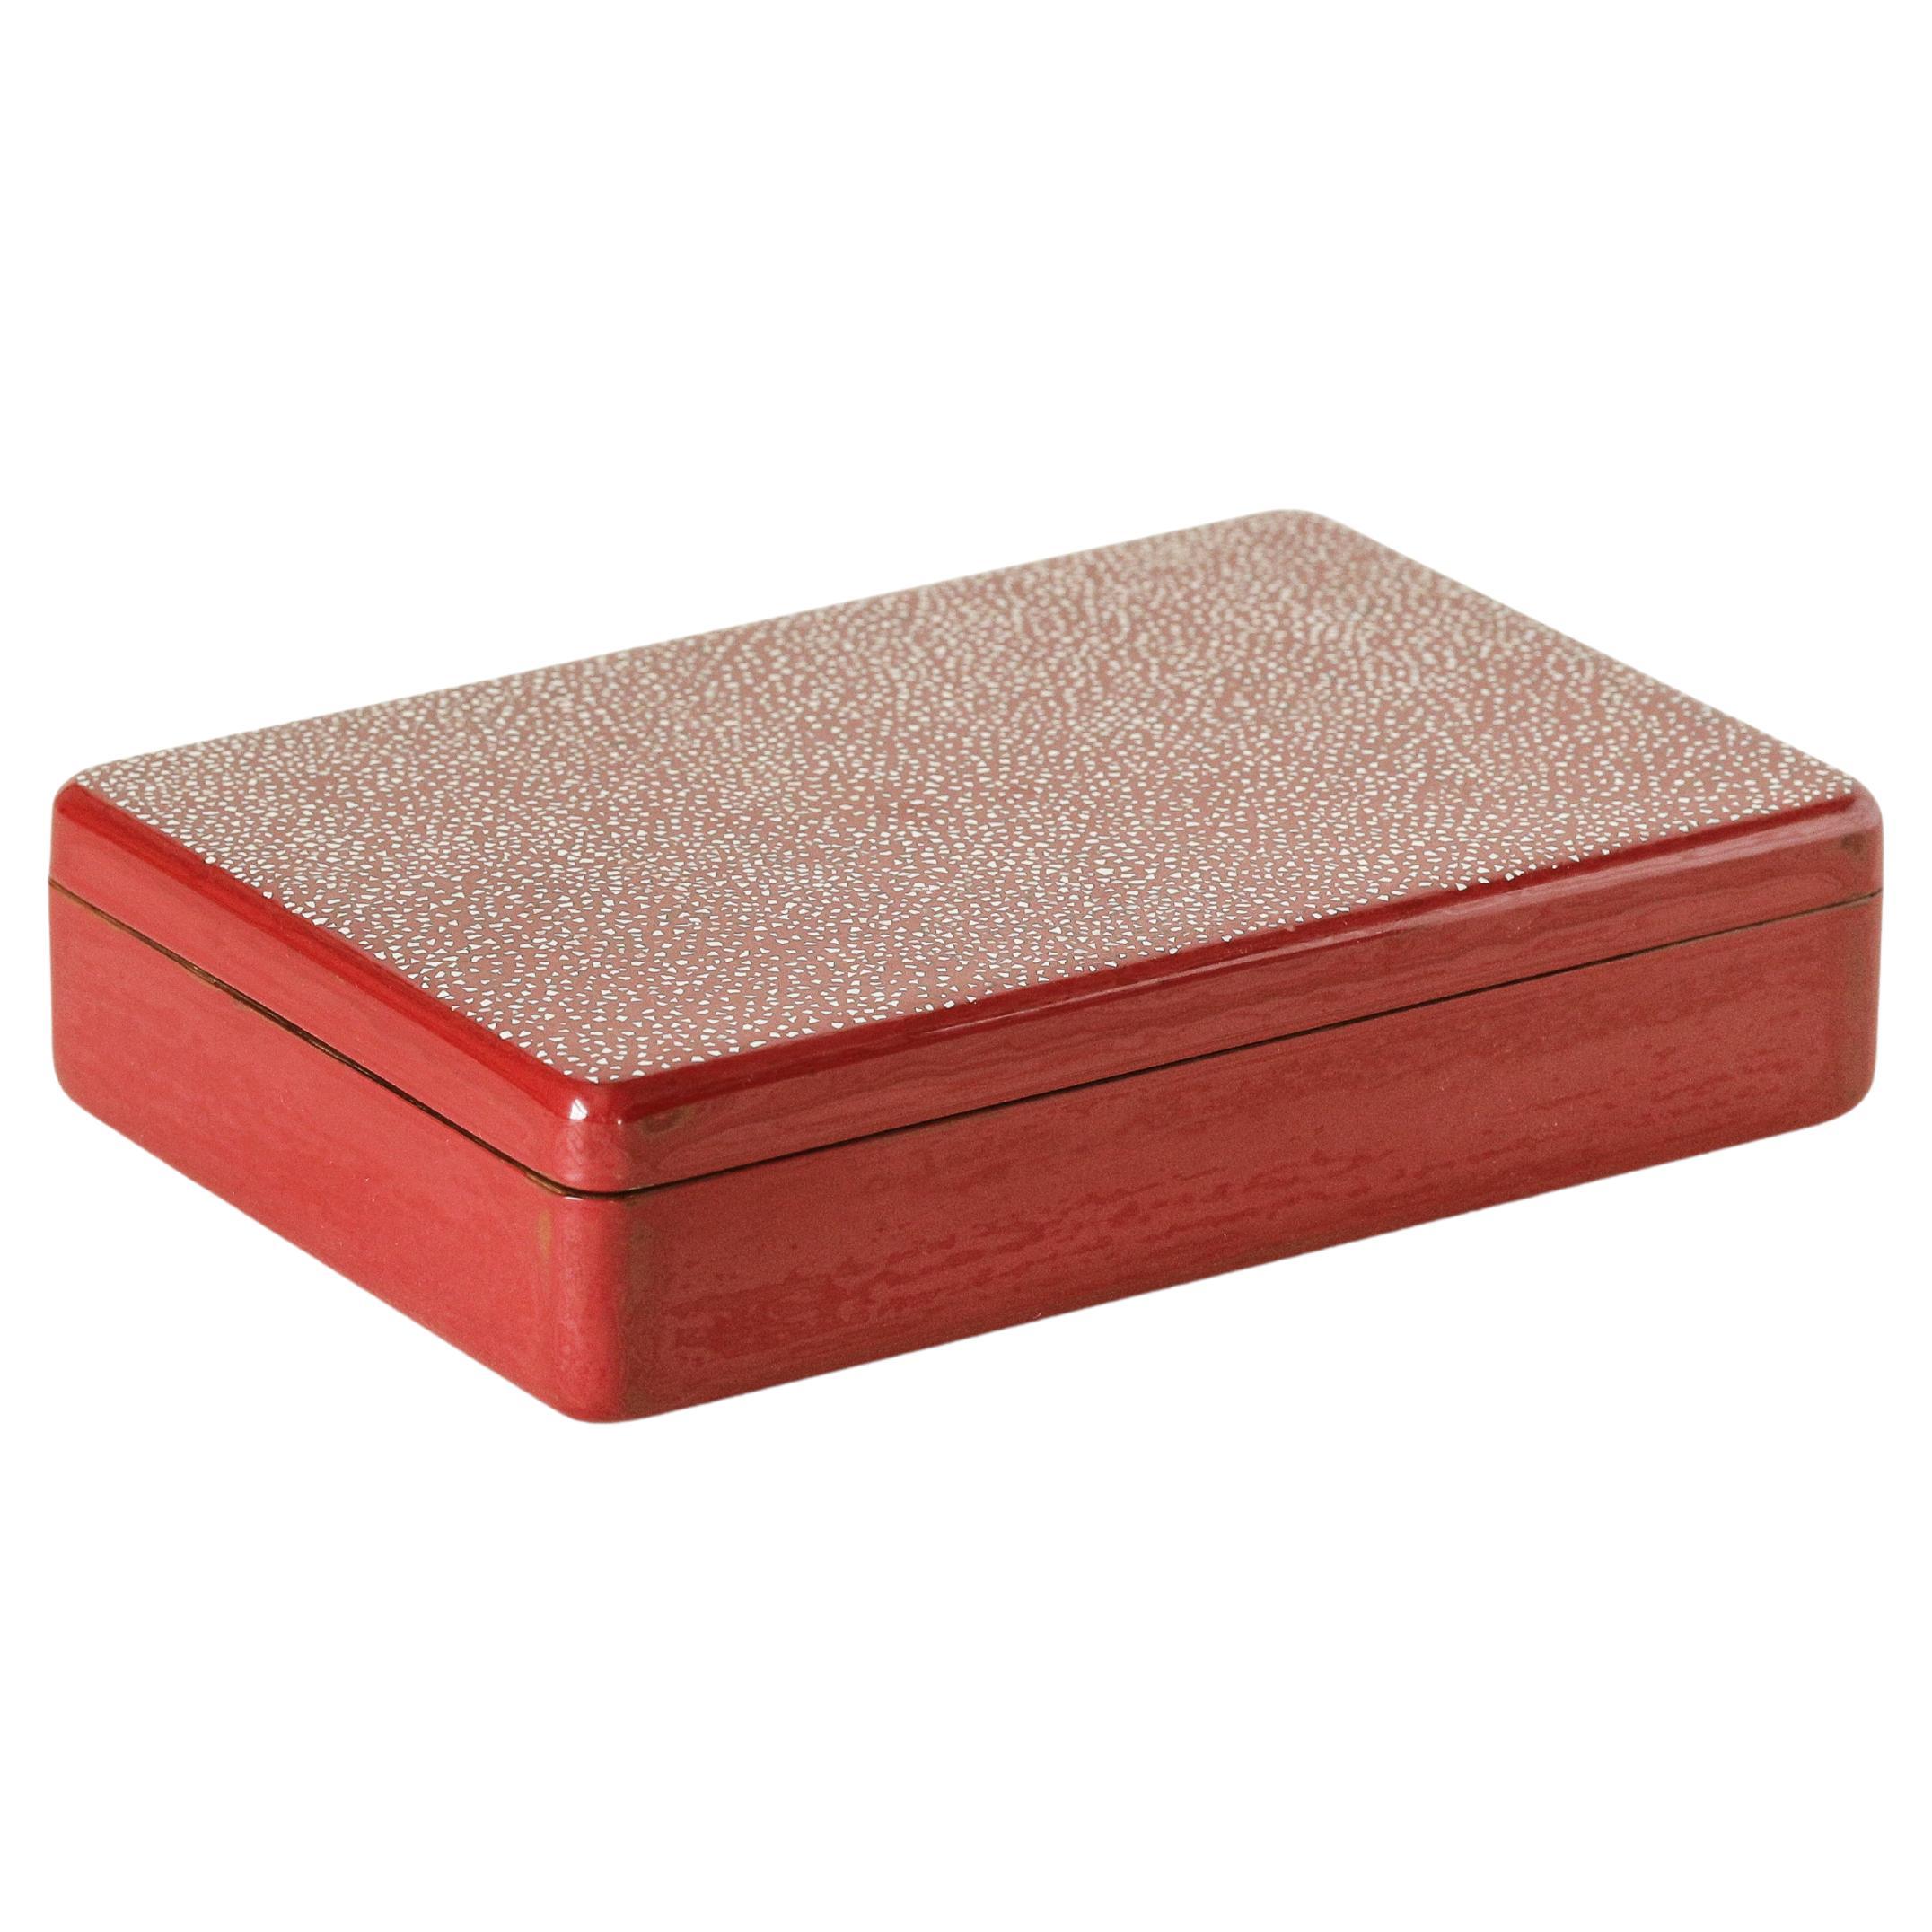 Urushi Natural Red Lacquer Allsorts Box - Large by Alexander Lamont